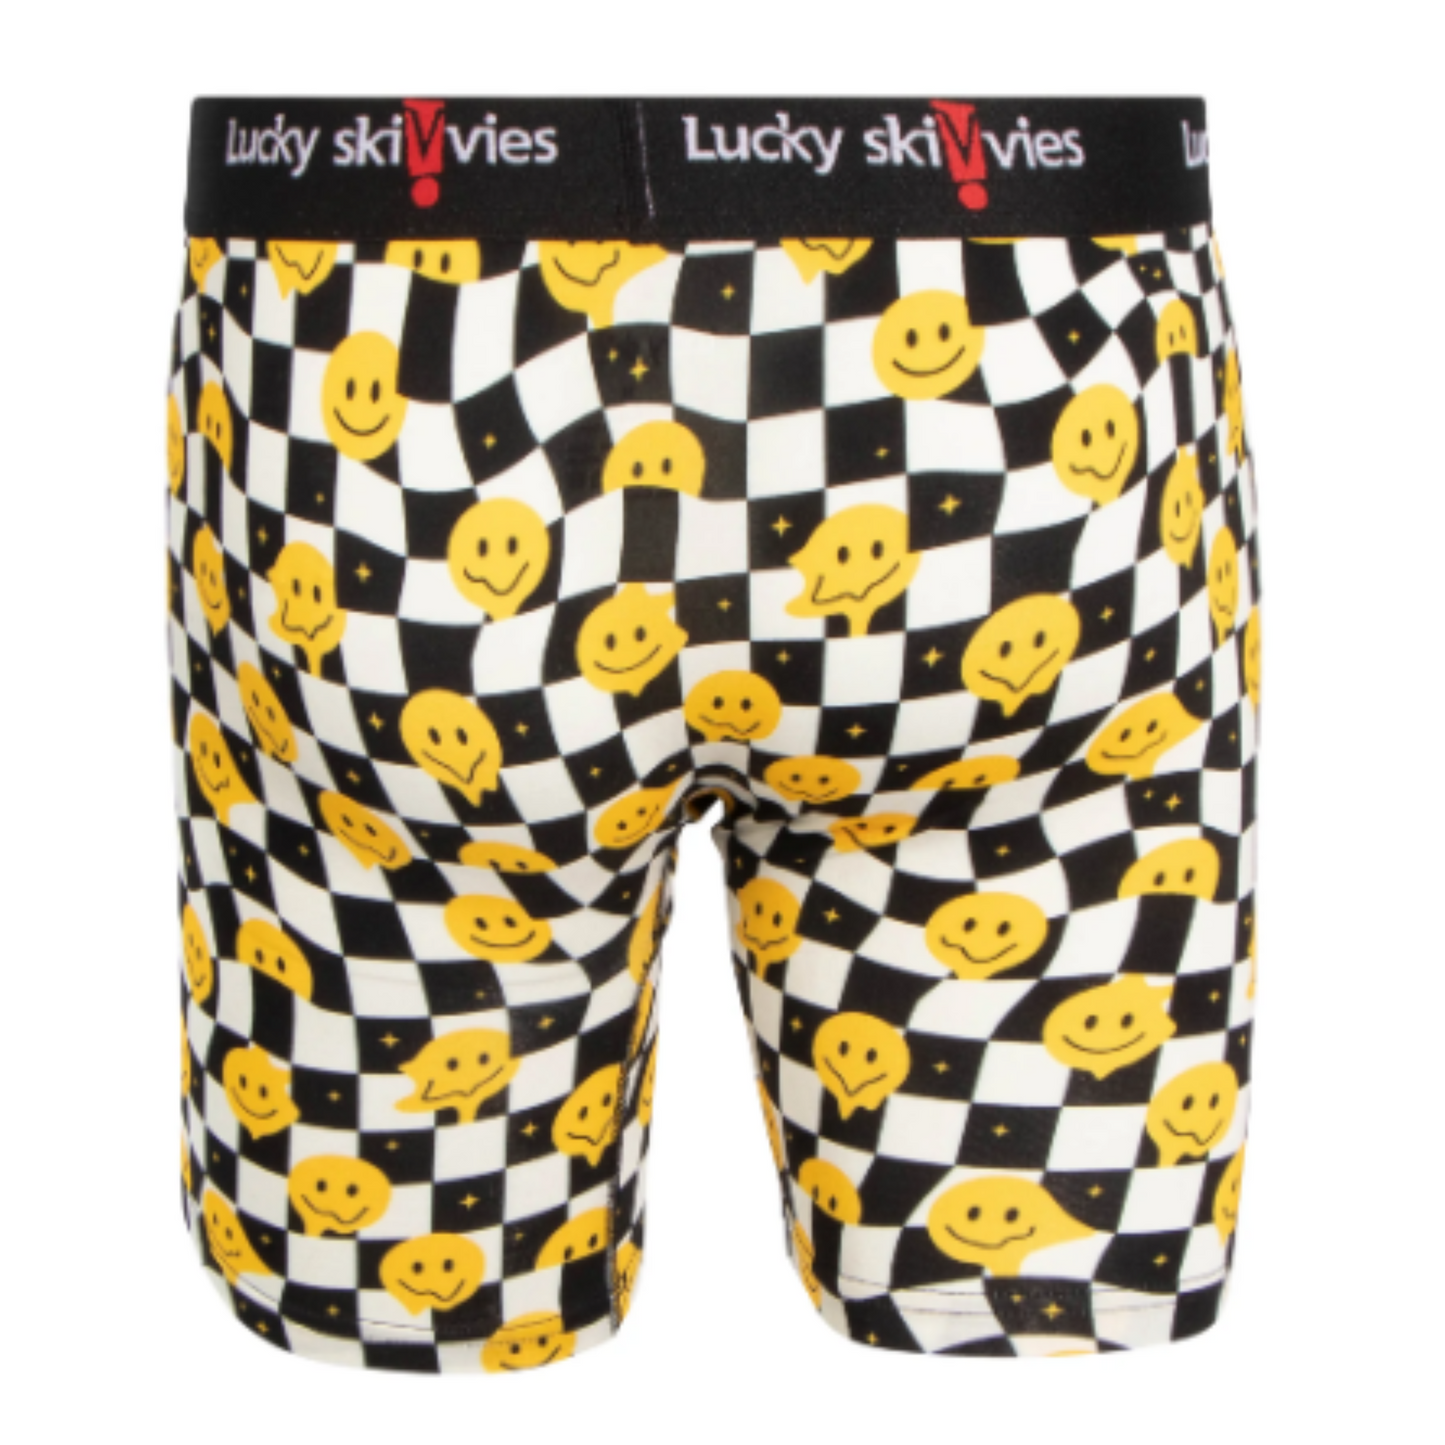 Checkered Smile Gender Neutral Boxer Briefs by Lucky Skivvies